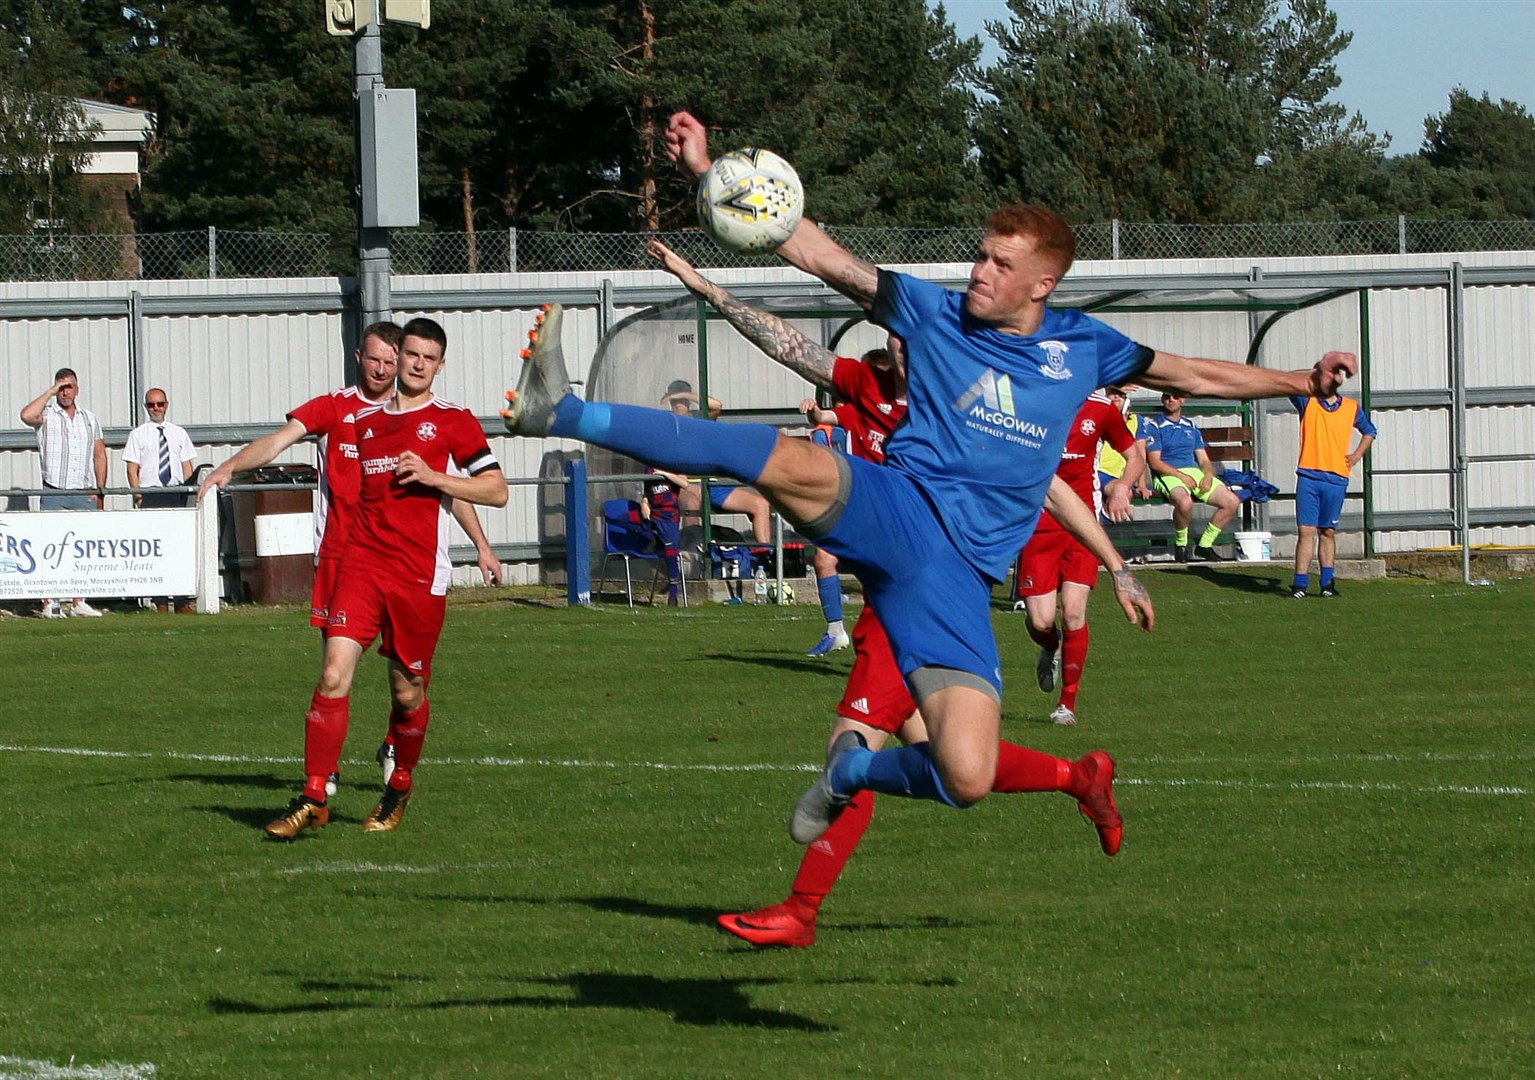 The Jags' Scott Morrison needs a leg up to control the ball in Saturday's cup win. Pic: Frances Porter